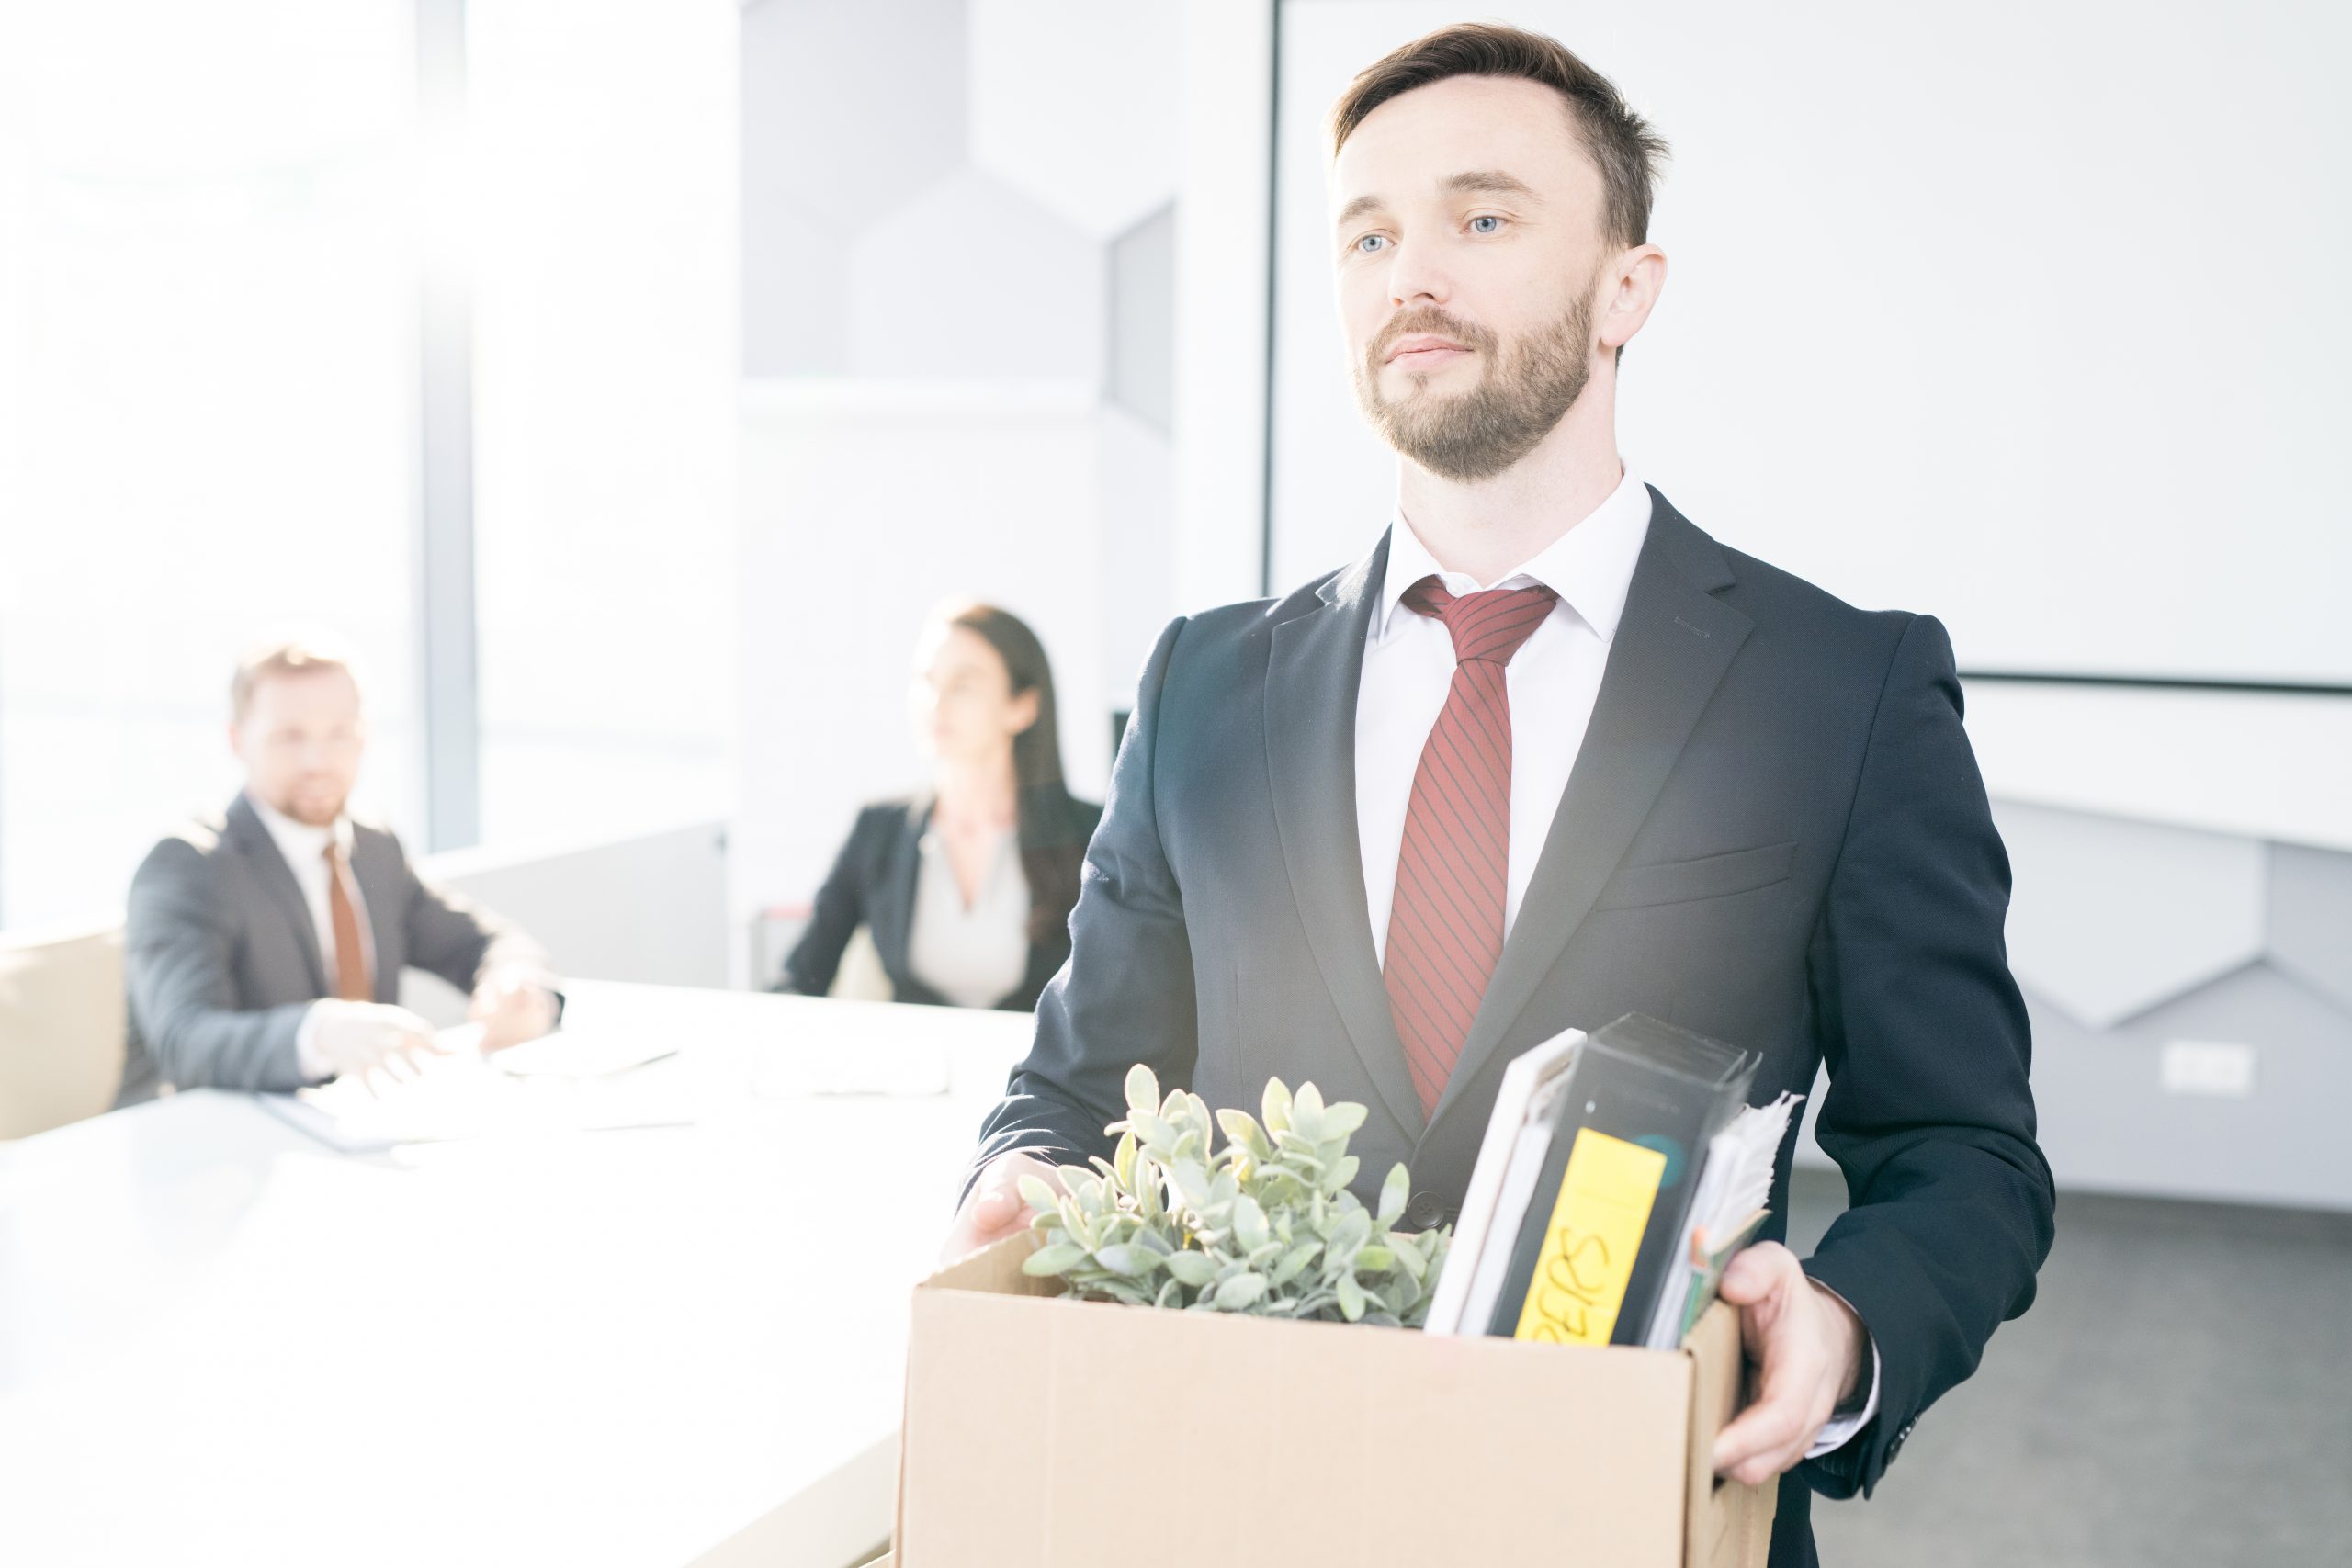 What Happens To Post-Separation Redundancy Payments? Accompanying image: portrait of man holding box of personal belongings leaving office after a redundancy